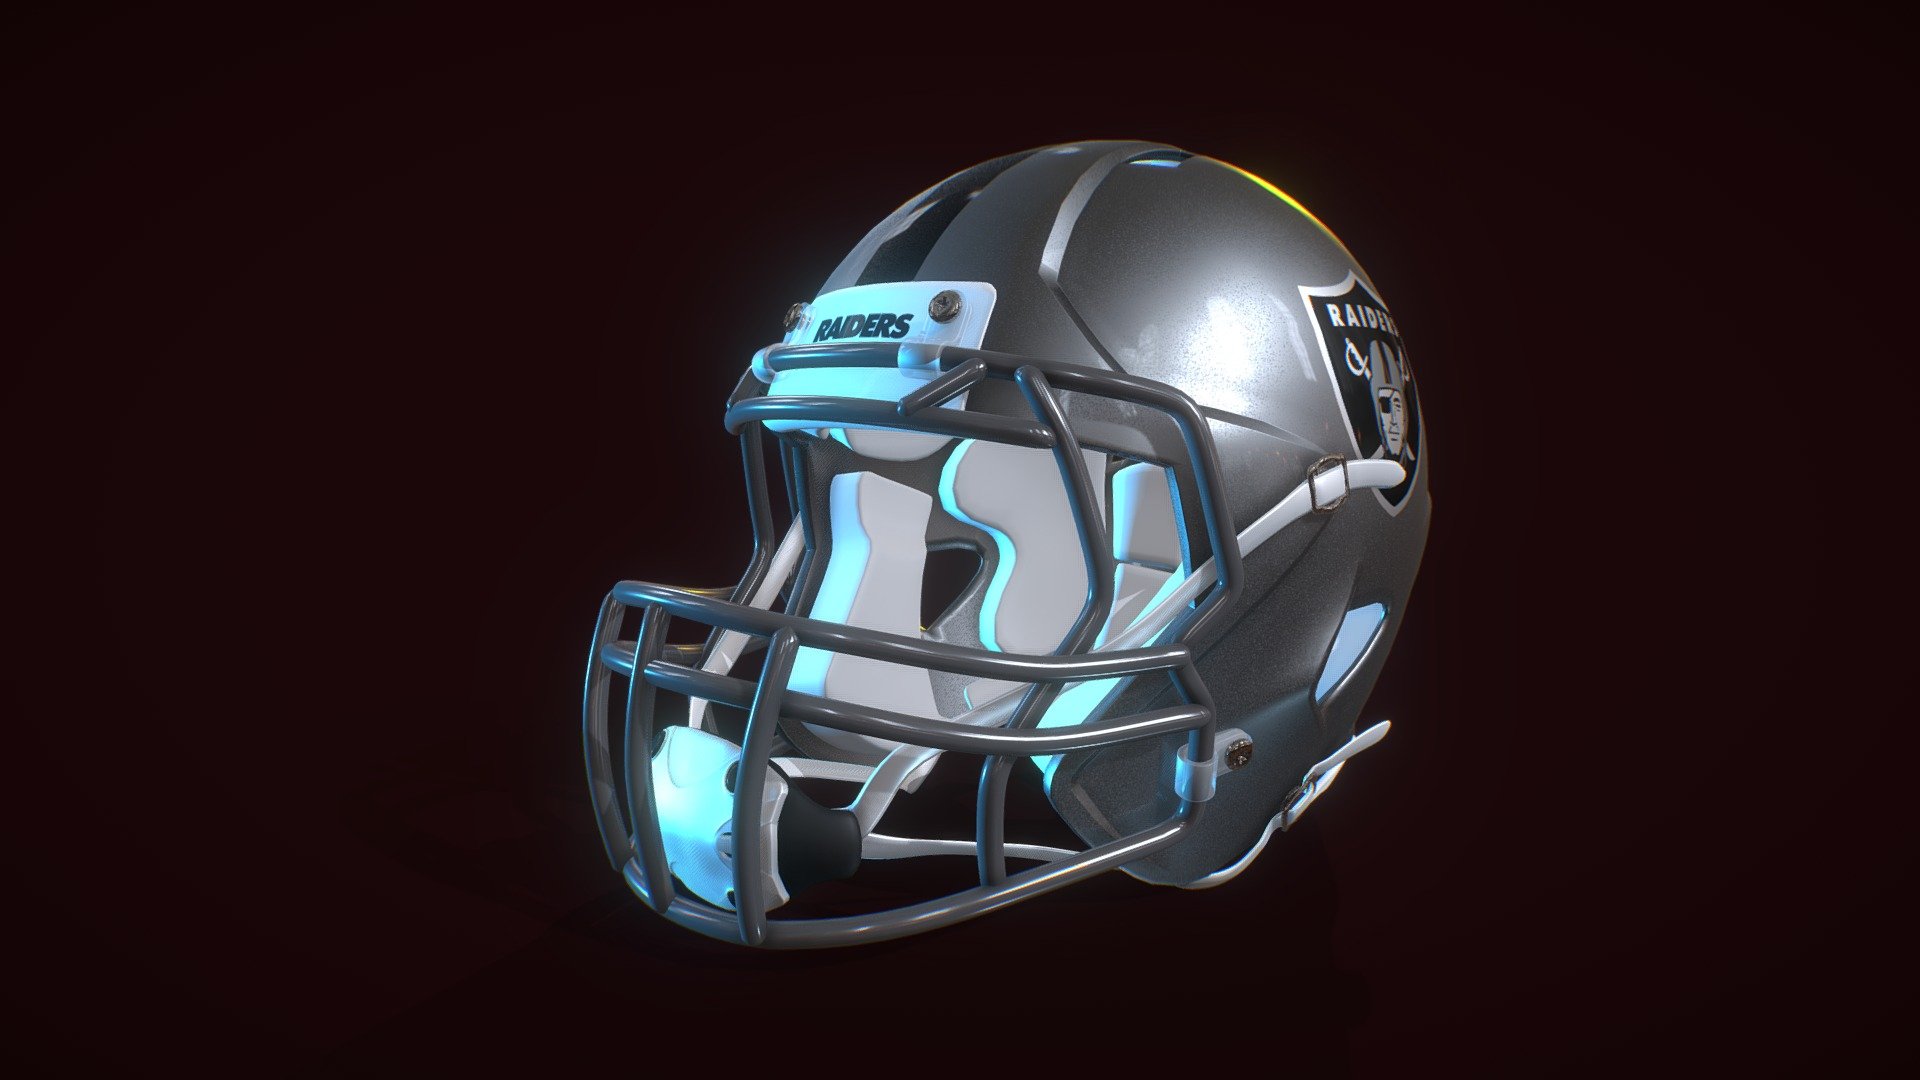 Modelled after the RIDDELL SPEED CLASSIC helmet. I chose the Raiders branding just because I like their logo 3d model